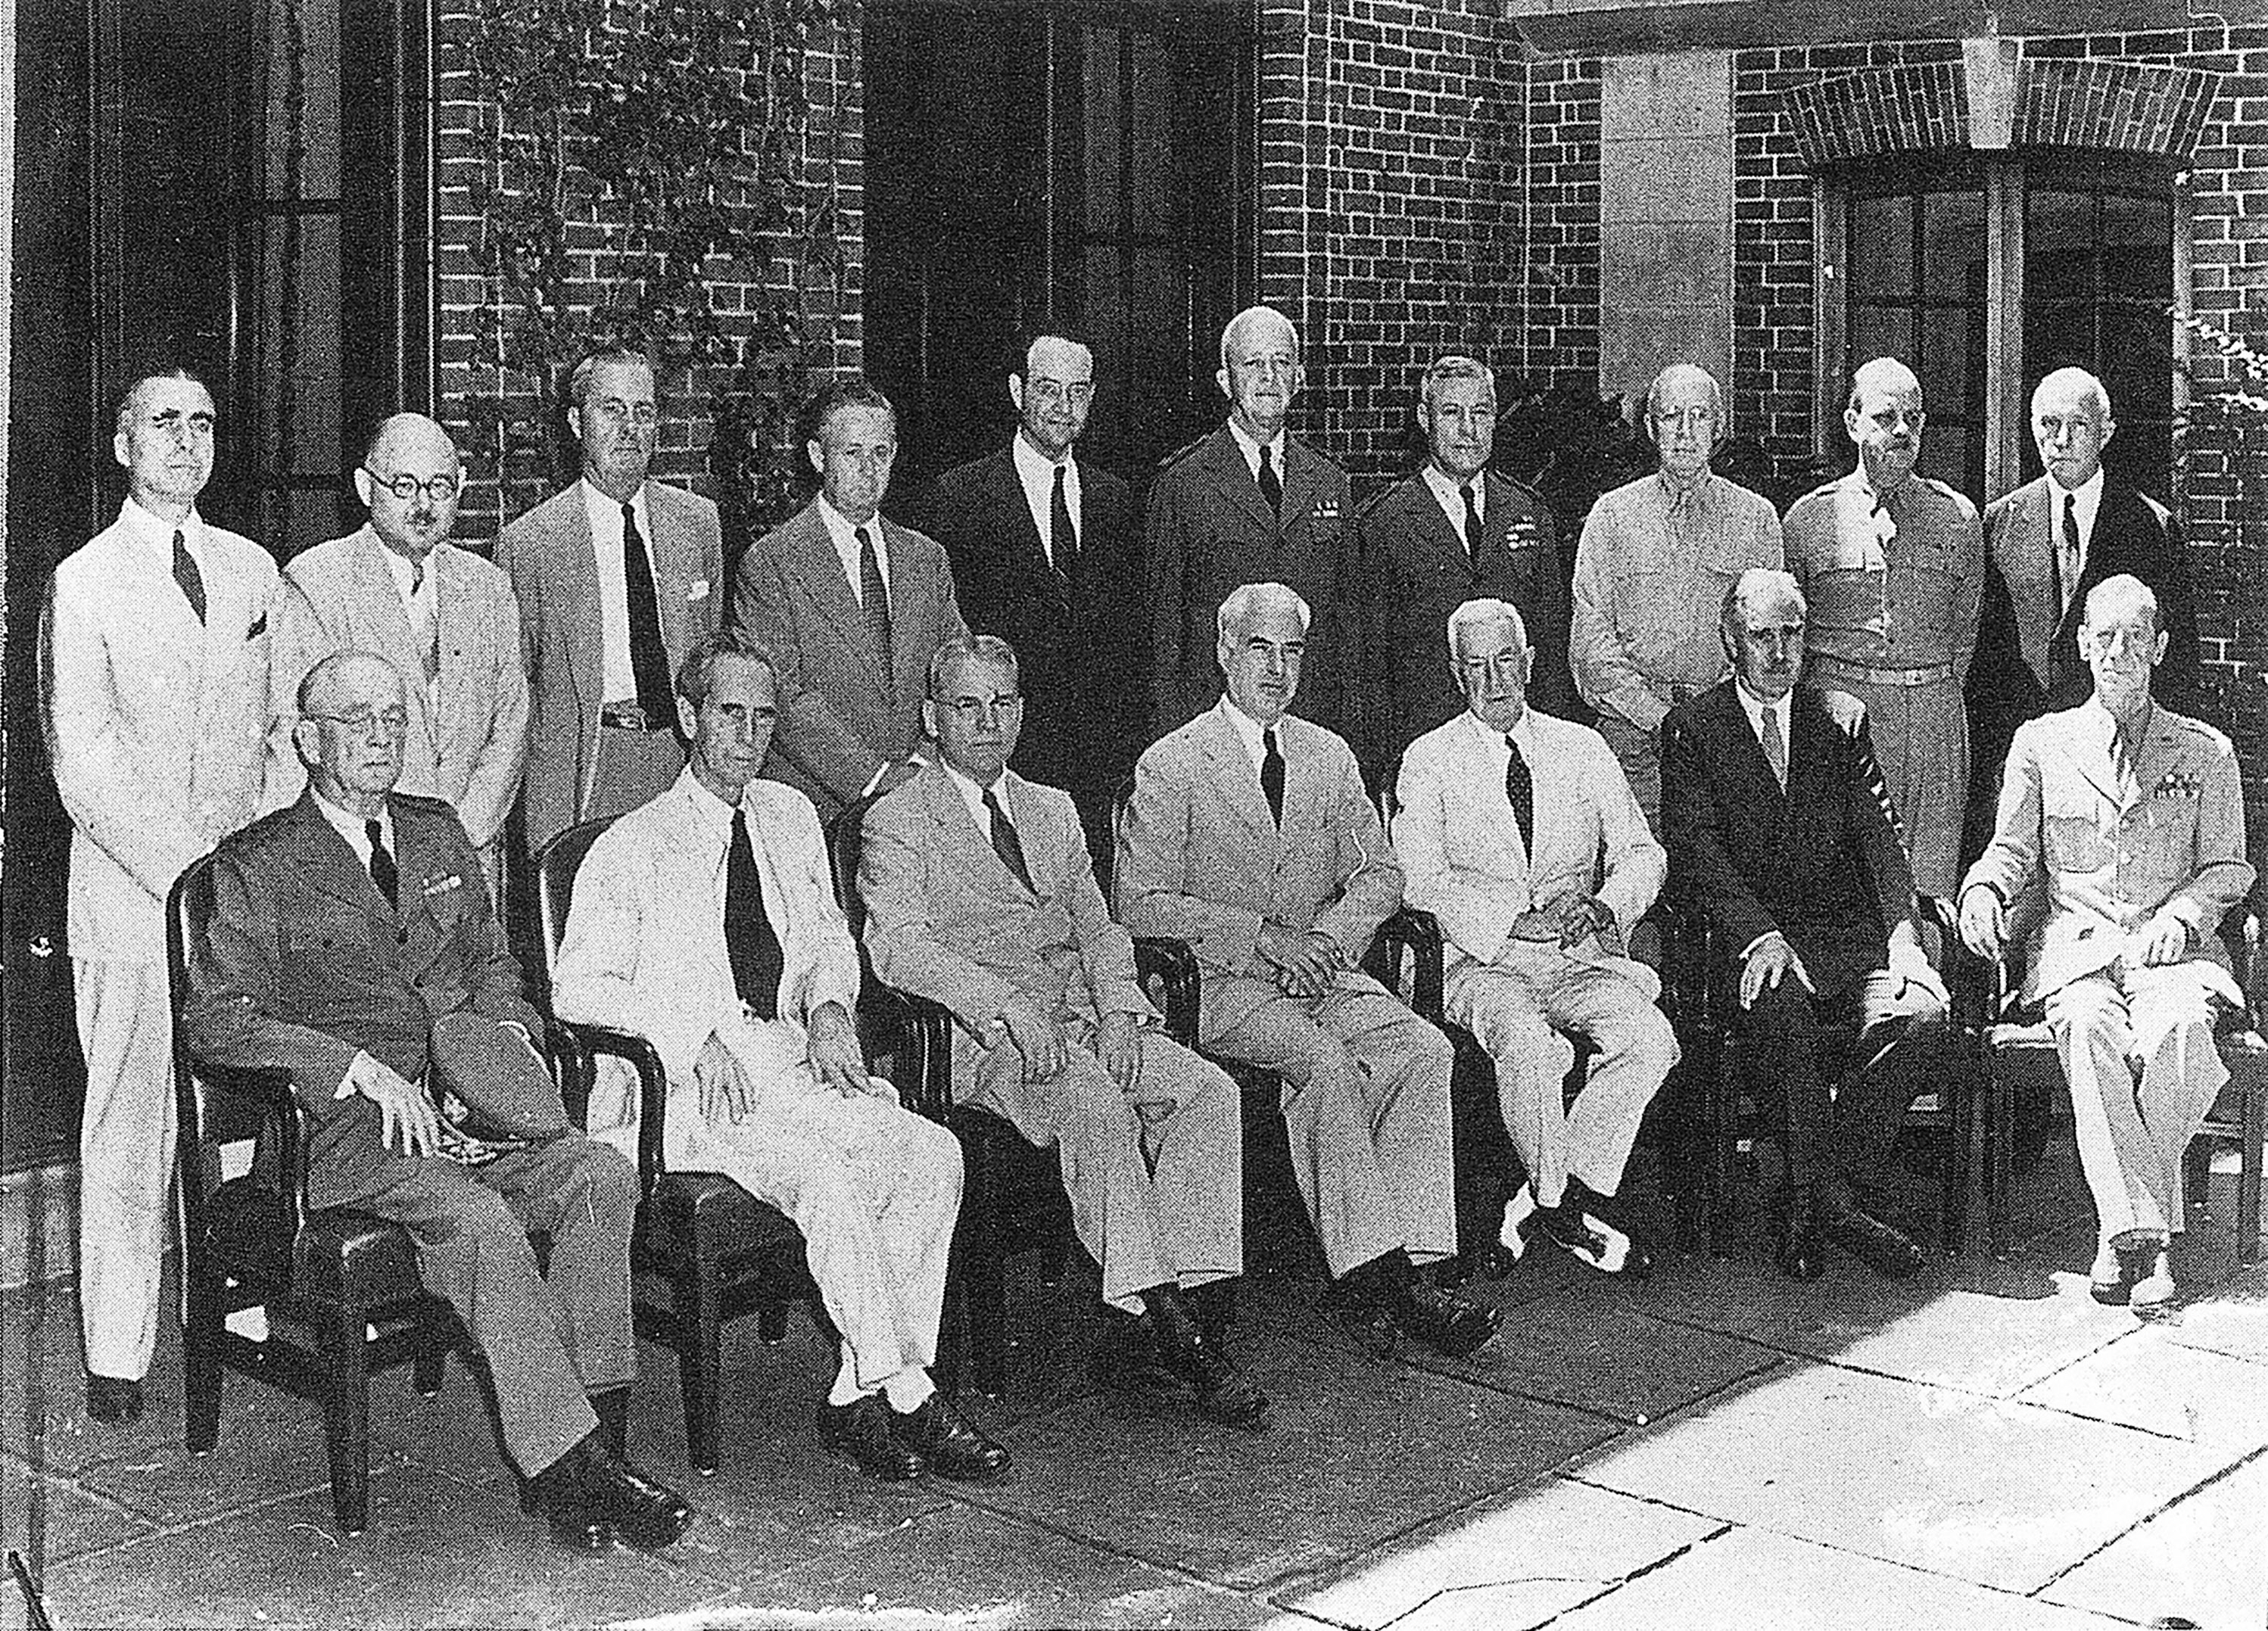 Members of the American delegation to the Dumbarton Oaks Conversations in front of the Music Room, 19 August 1944